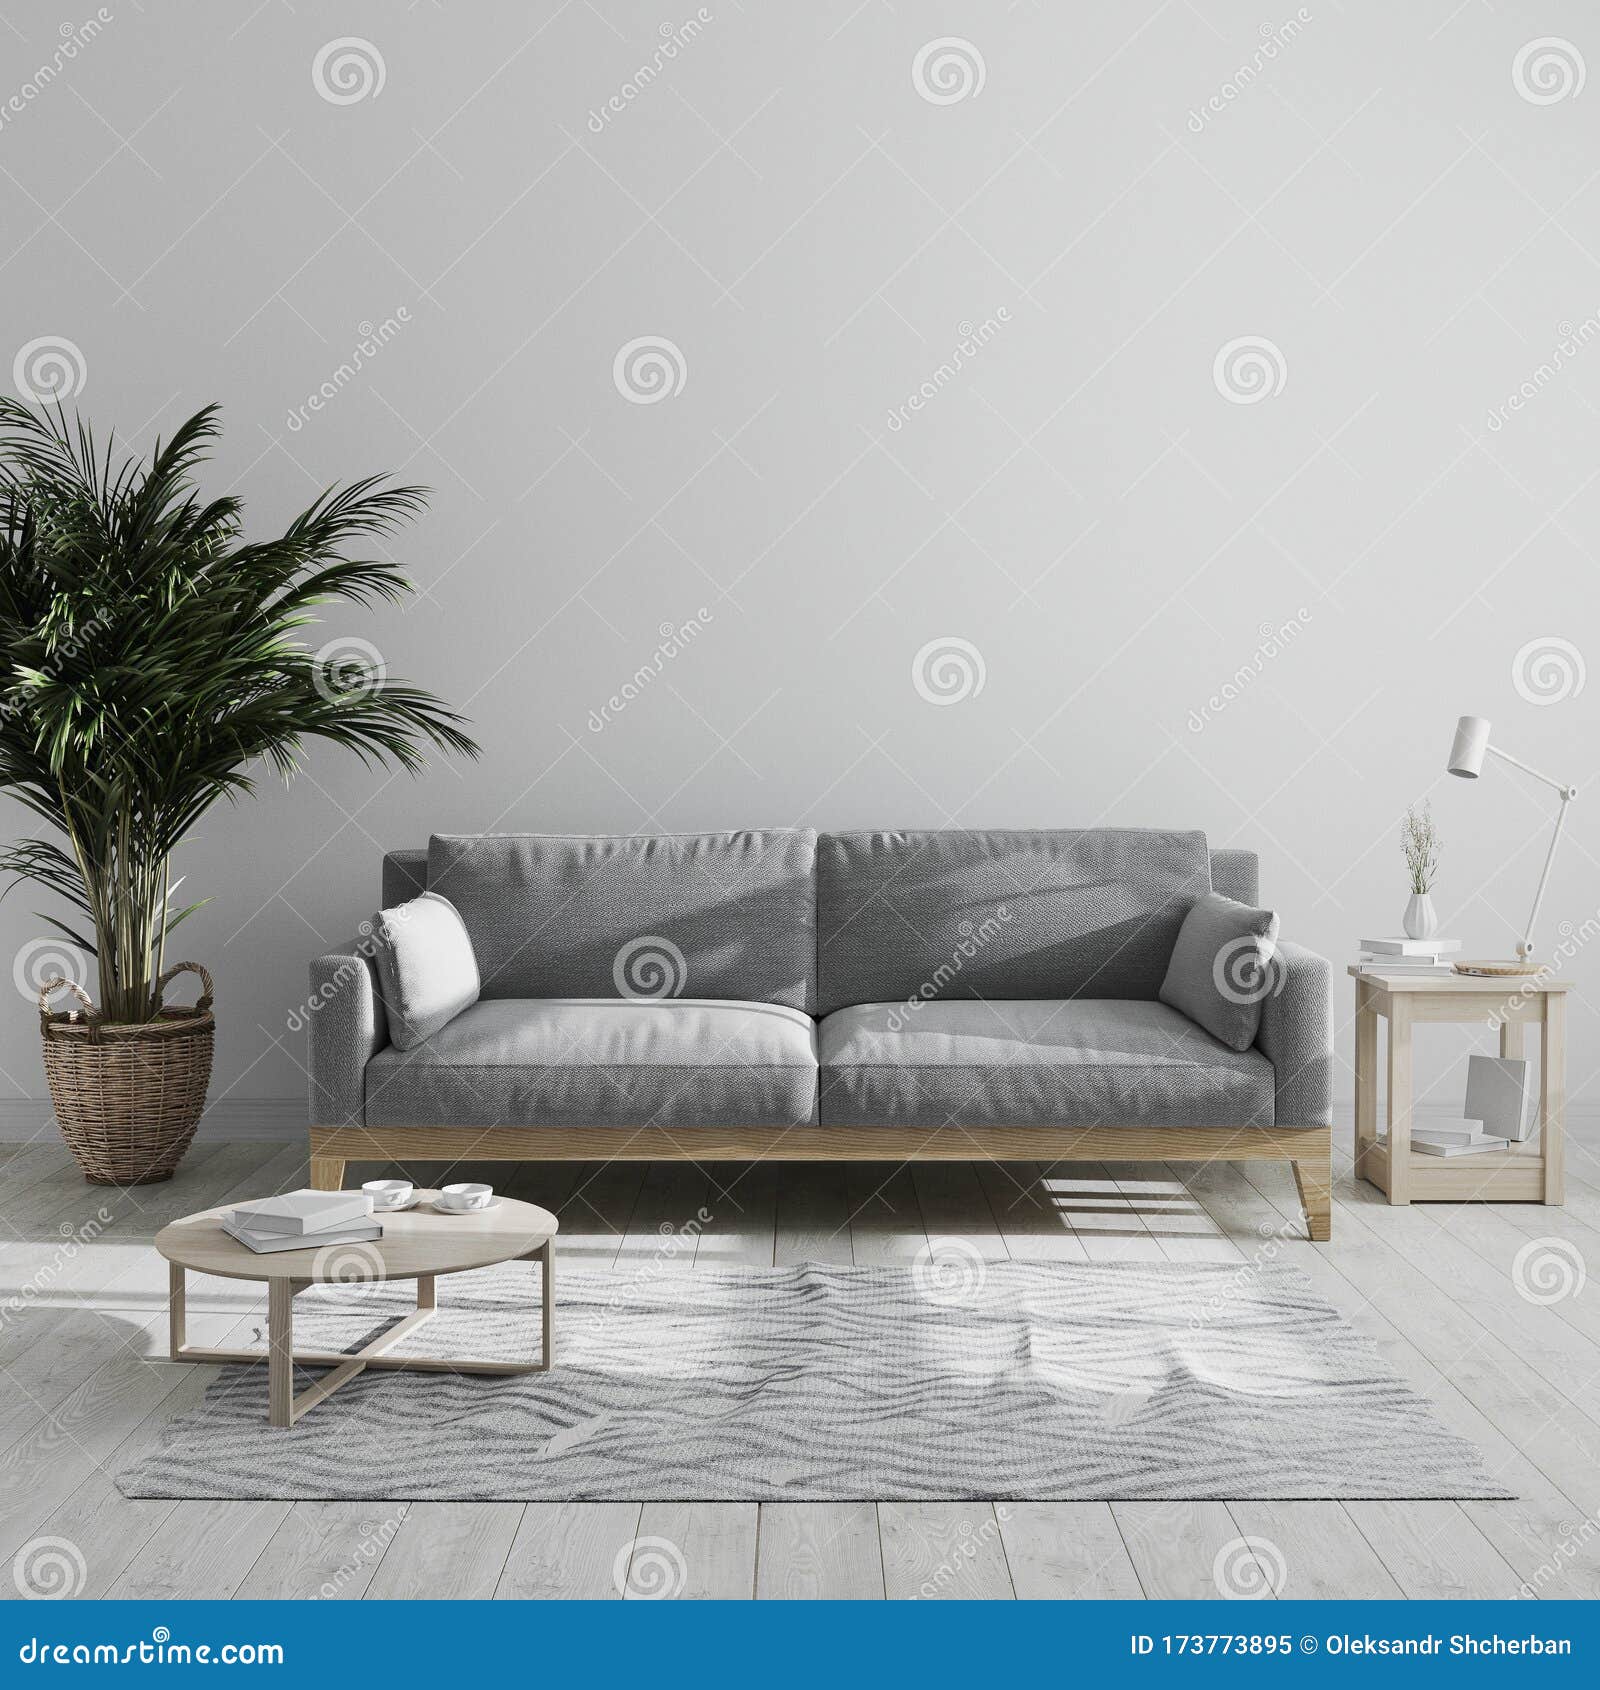 Download Modern Minimalist Living Room Interior Mock Up With Gray Sofa And Palm Tree Gray Living Room Interior Background Scandinavian Stock Illustration Illustration Of Scandinavian Mockup 173773895